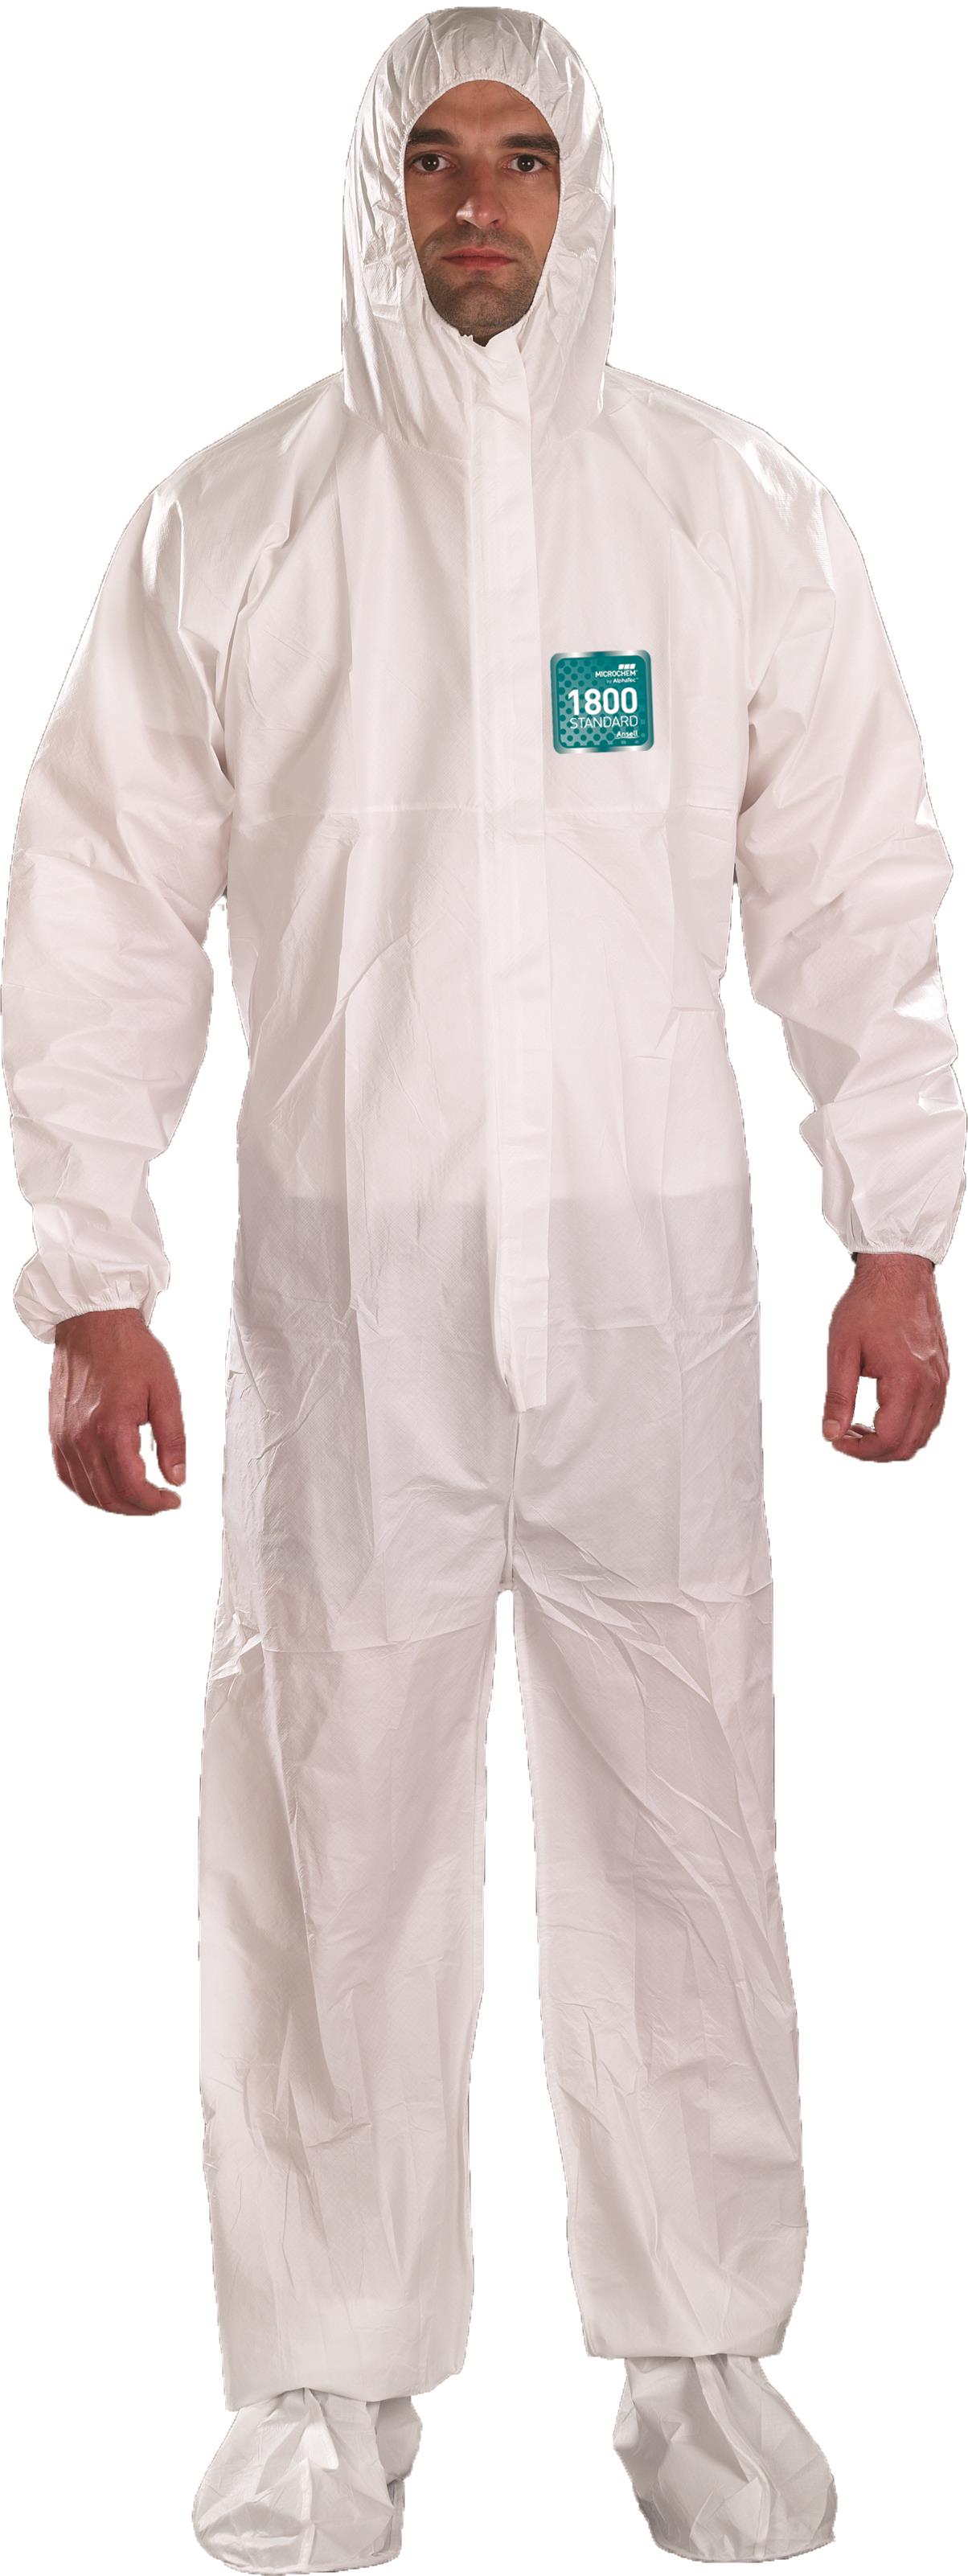 MICROCHEM 1800 HOODED BOOTED COVERALL - Tagged Gloves